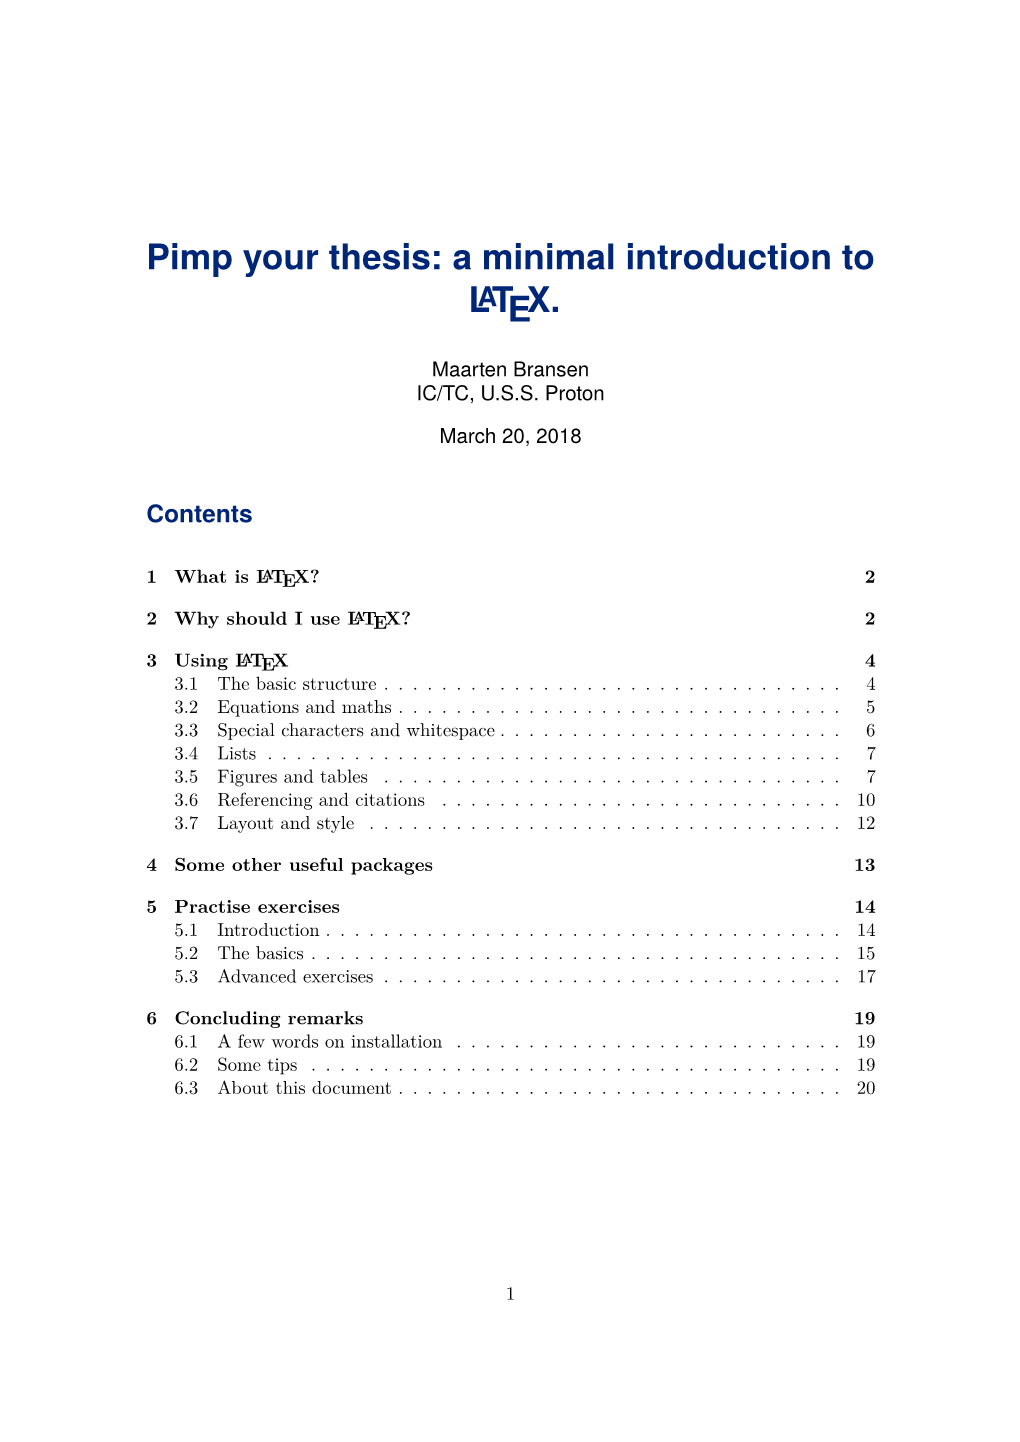 Pimp Your Thesis: a Minimal Introduction to LATEX